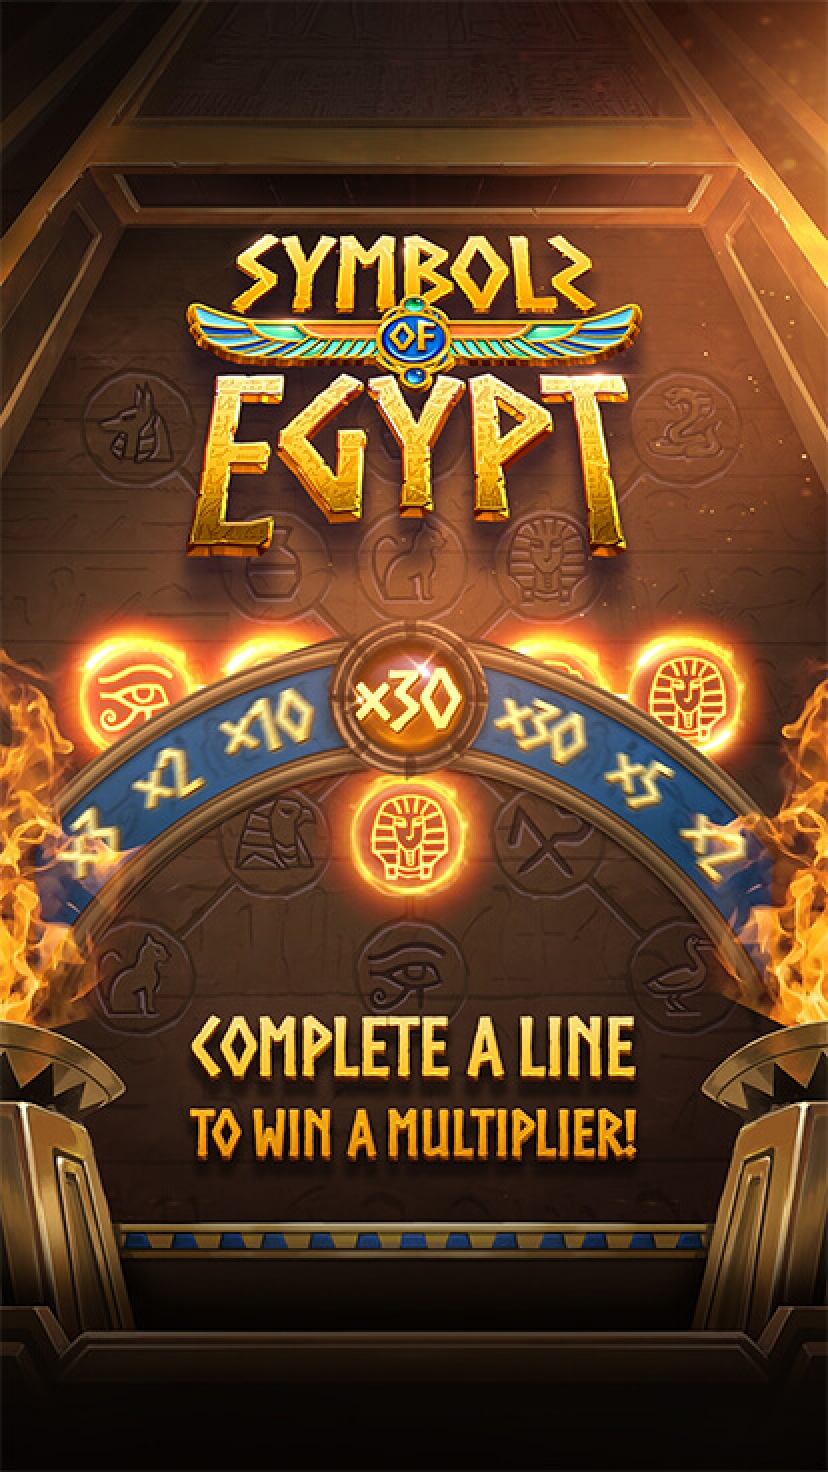 The Symbols of Egypt Online Slot Demo Game by PG Soft